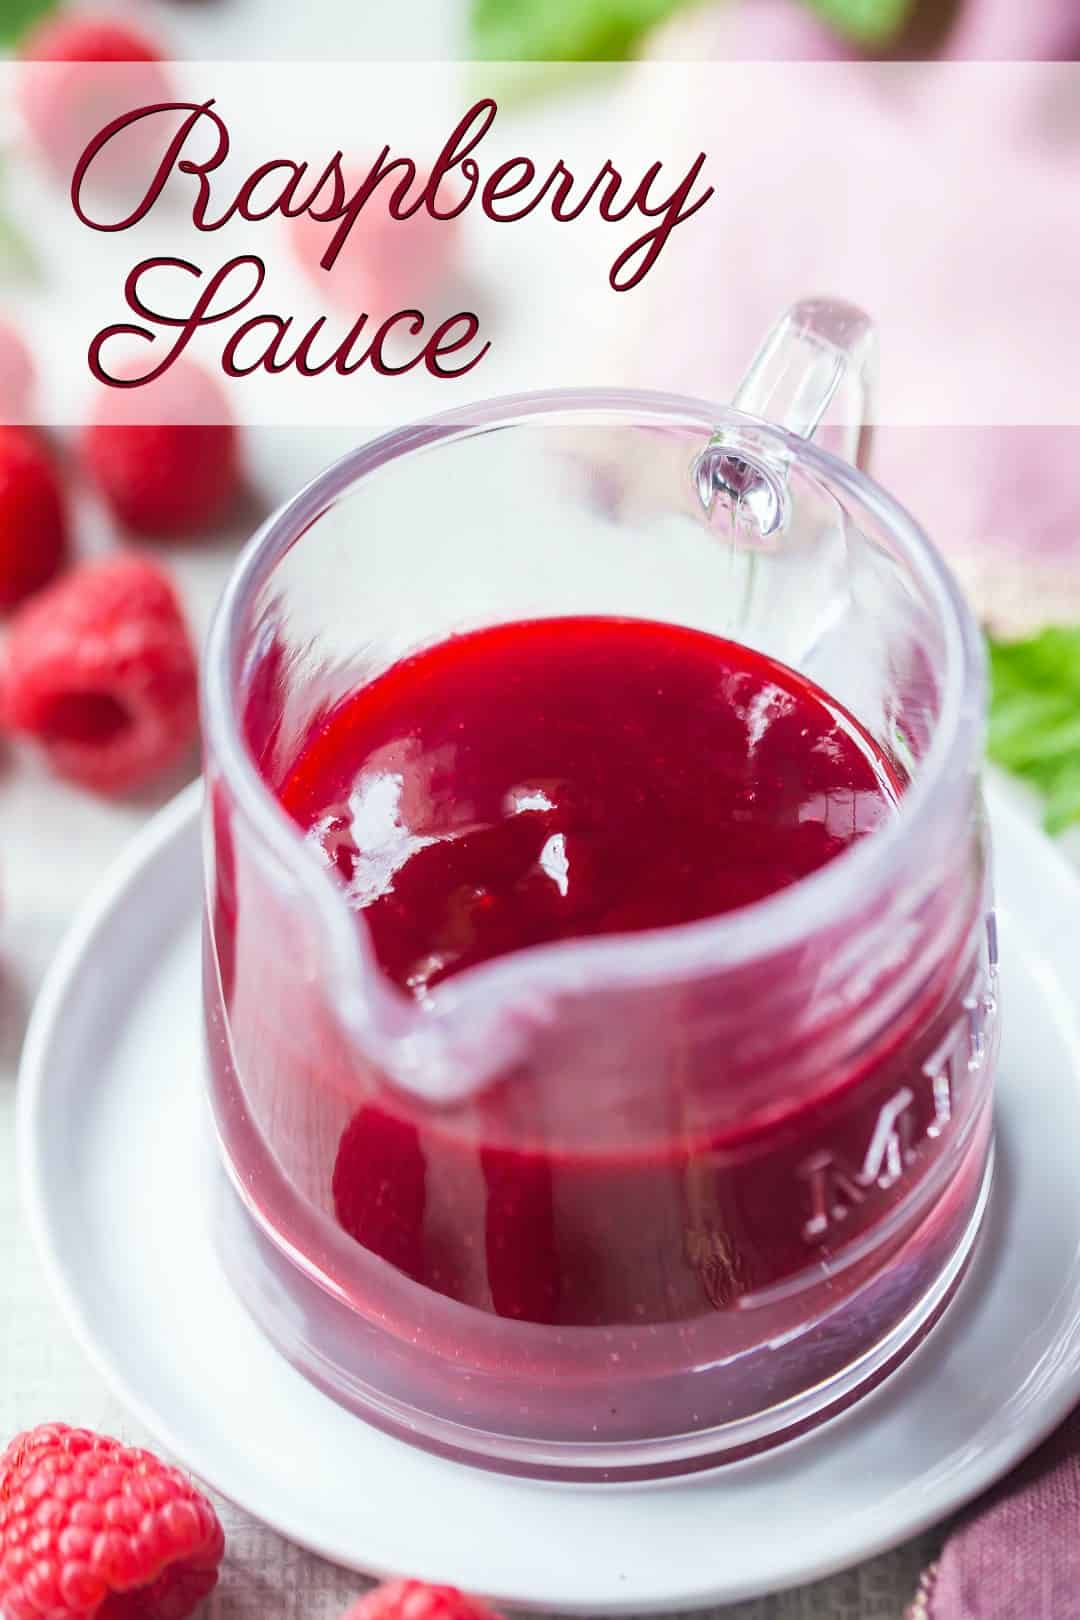 Small glass pitcher of seedless raspberry sauce, with a text overlay above that reads "Raspberry Sauce."